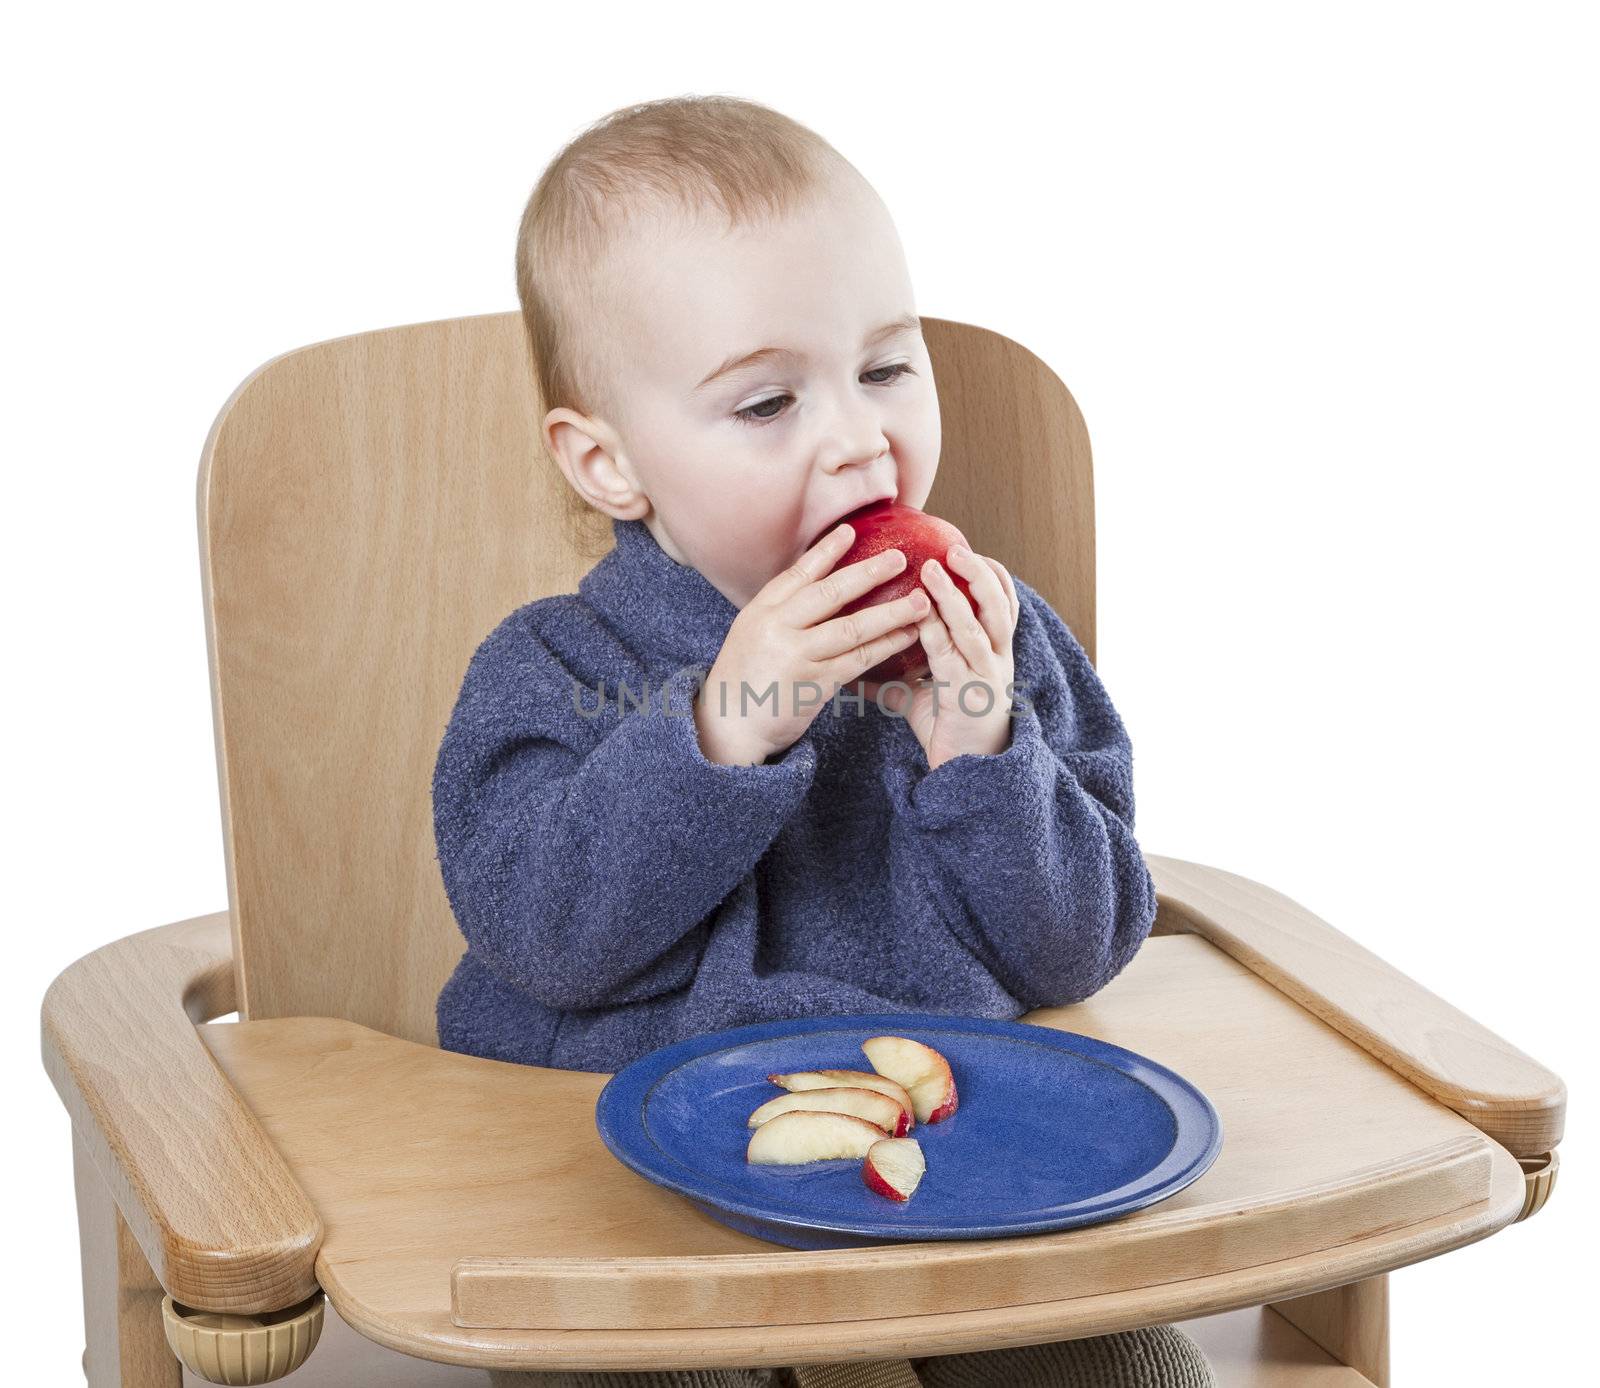 young child eating peaches in high chair by gewoldi